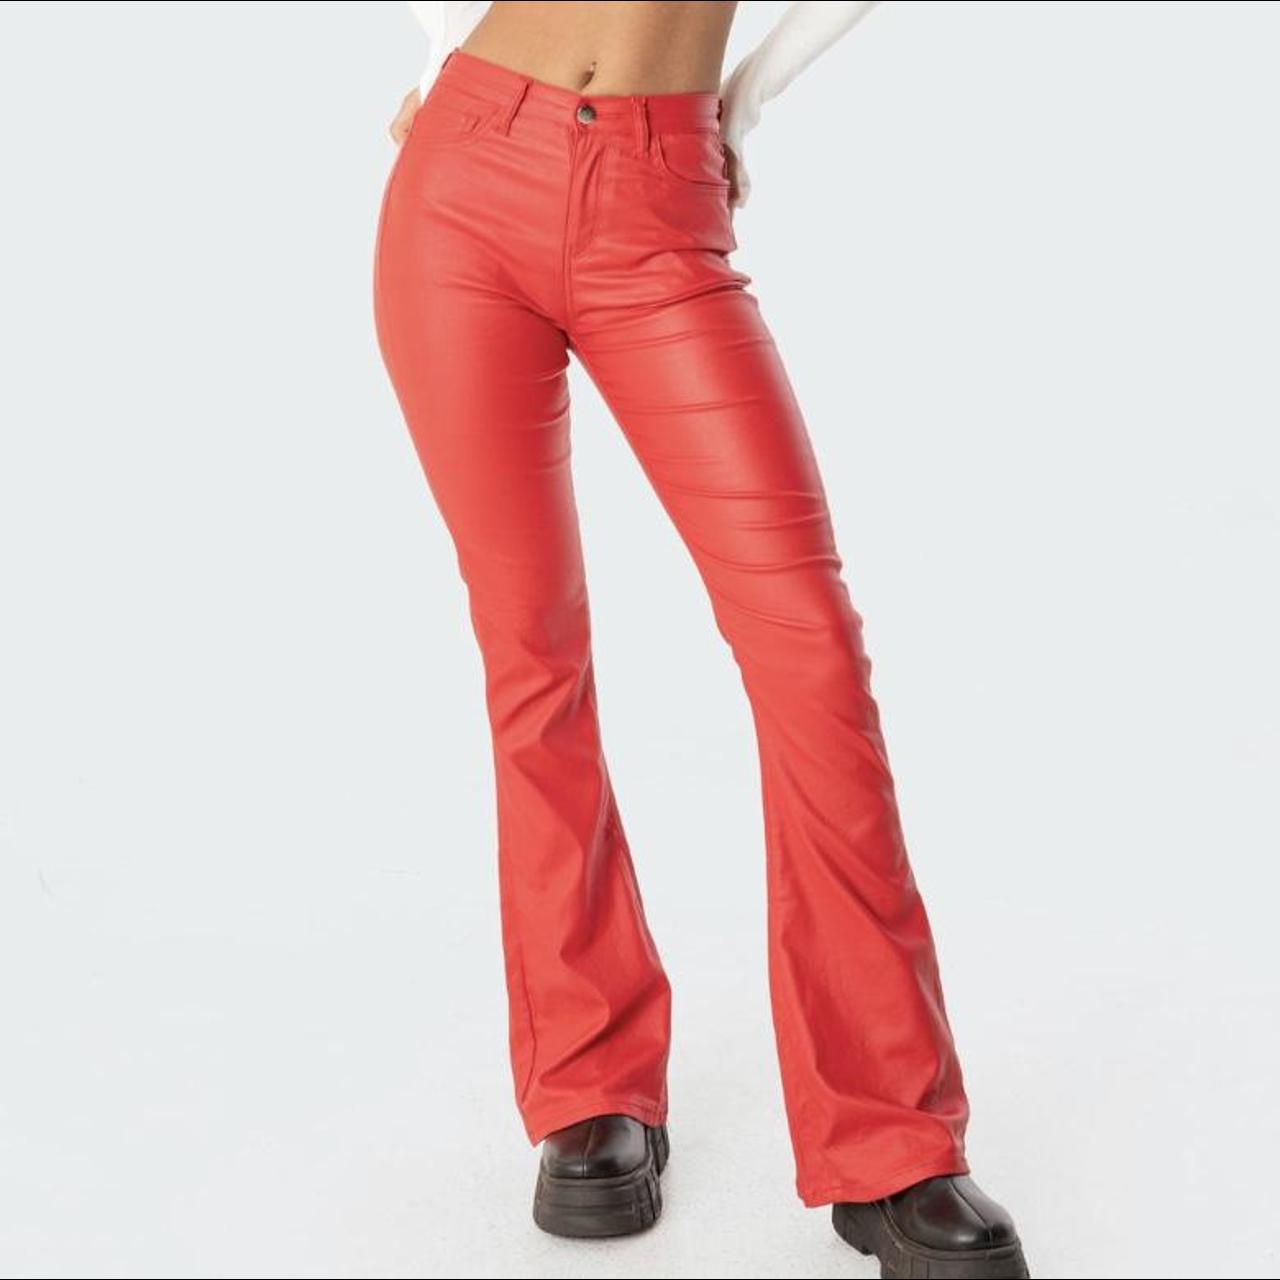 Edikted Red Leather Pants Sold on their site for - Depop